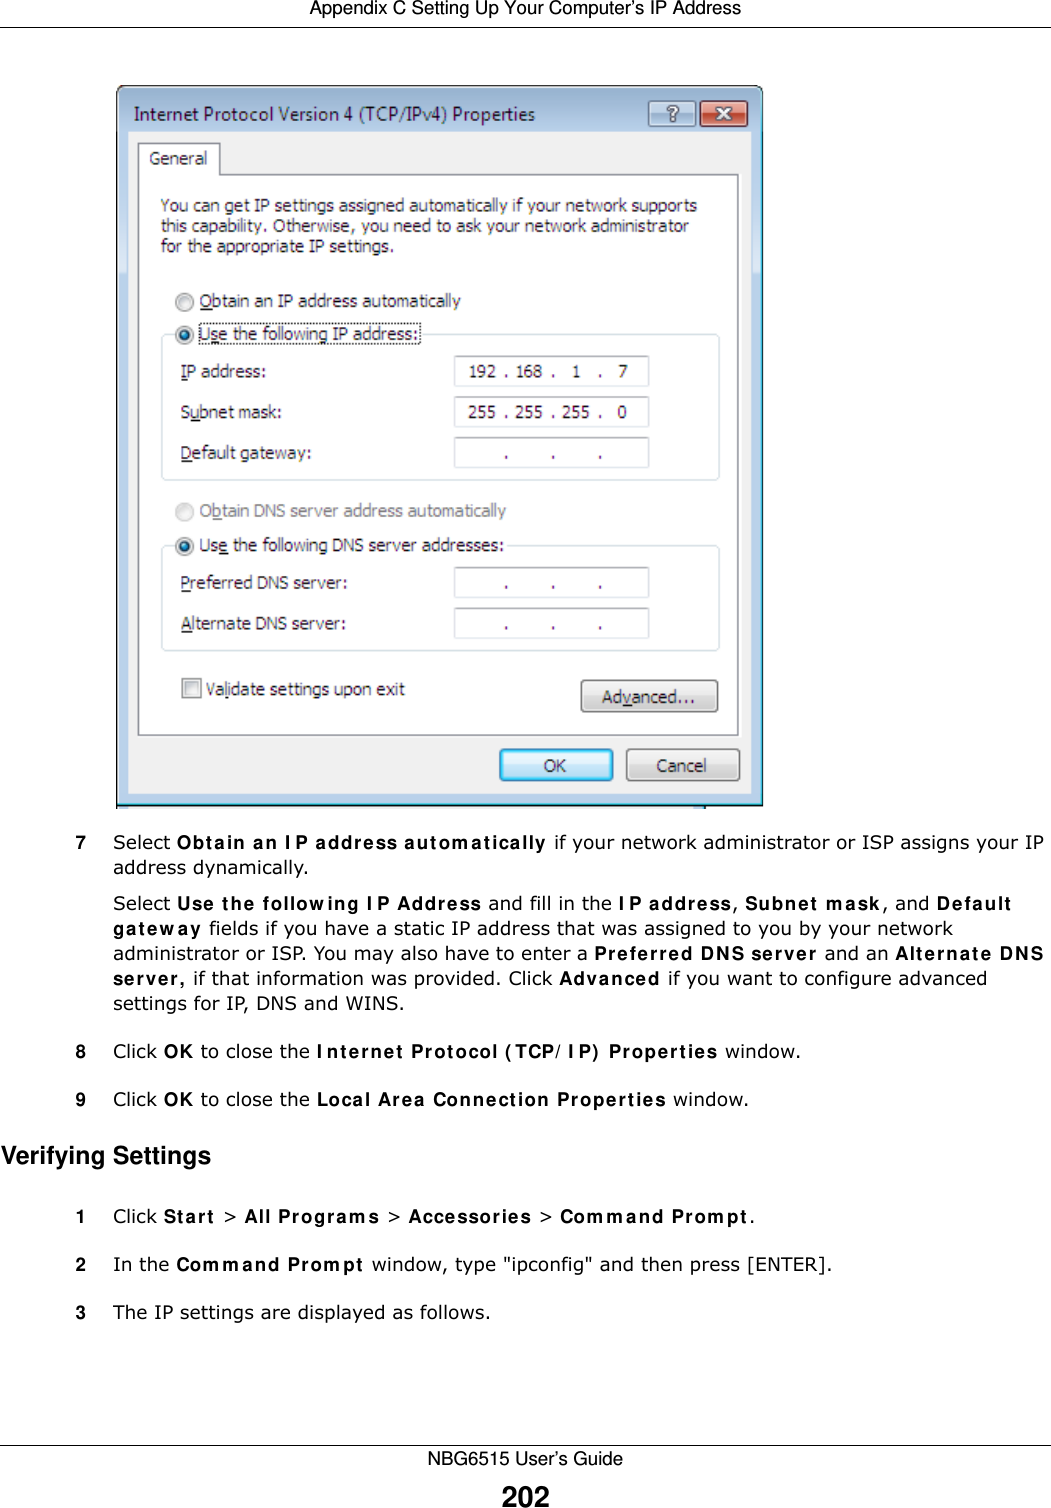 Appendix C Setting Up Your Computer’s IP AddressNBG6515 User’s Guide2027Select Obt ain  a n I P addre ss aut om at ica lly if your network administrator or ISP assigns your IP address dynamically.Select Use  t h e  follow ing I P Addre ss and fill in the I P a ddre ss, Subne t  m ask, and D e fau lt  ga t e w a y fields if you have a static IP address that was assigned to you by your network administrator or ISP. You may also have to enter a Pre fe r r e d D N S se rve r  and an Alt e rn a t e  DN S ser ver , if that information was provided. Click Adva nced if you want to configure advanced settings for IP, DNS and WINS. 8Click OK to close the I nt erne t  Prot ocol ( TCP/ I P)  Proper t ie s window.9Click OK to close the Loca l Area  Conn ect ion Pr oper t ies window.Verifying Settings1Click St a rt  &gt; All Pr ogra m s &gt; Acce ssor ies &gt; Com m a nd Pr om pt .2In the Com m a nd Pr om pt  window, type &quot;ipconfig&quot; and then press [ENTER]. 3The IP settings are displayed as follows.